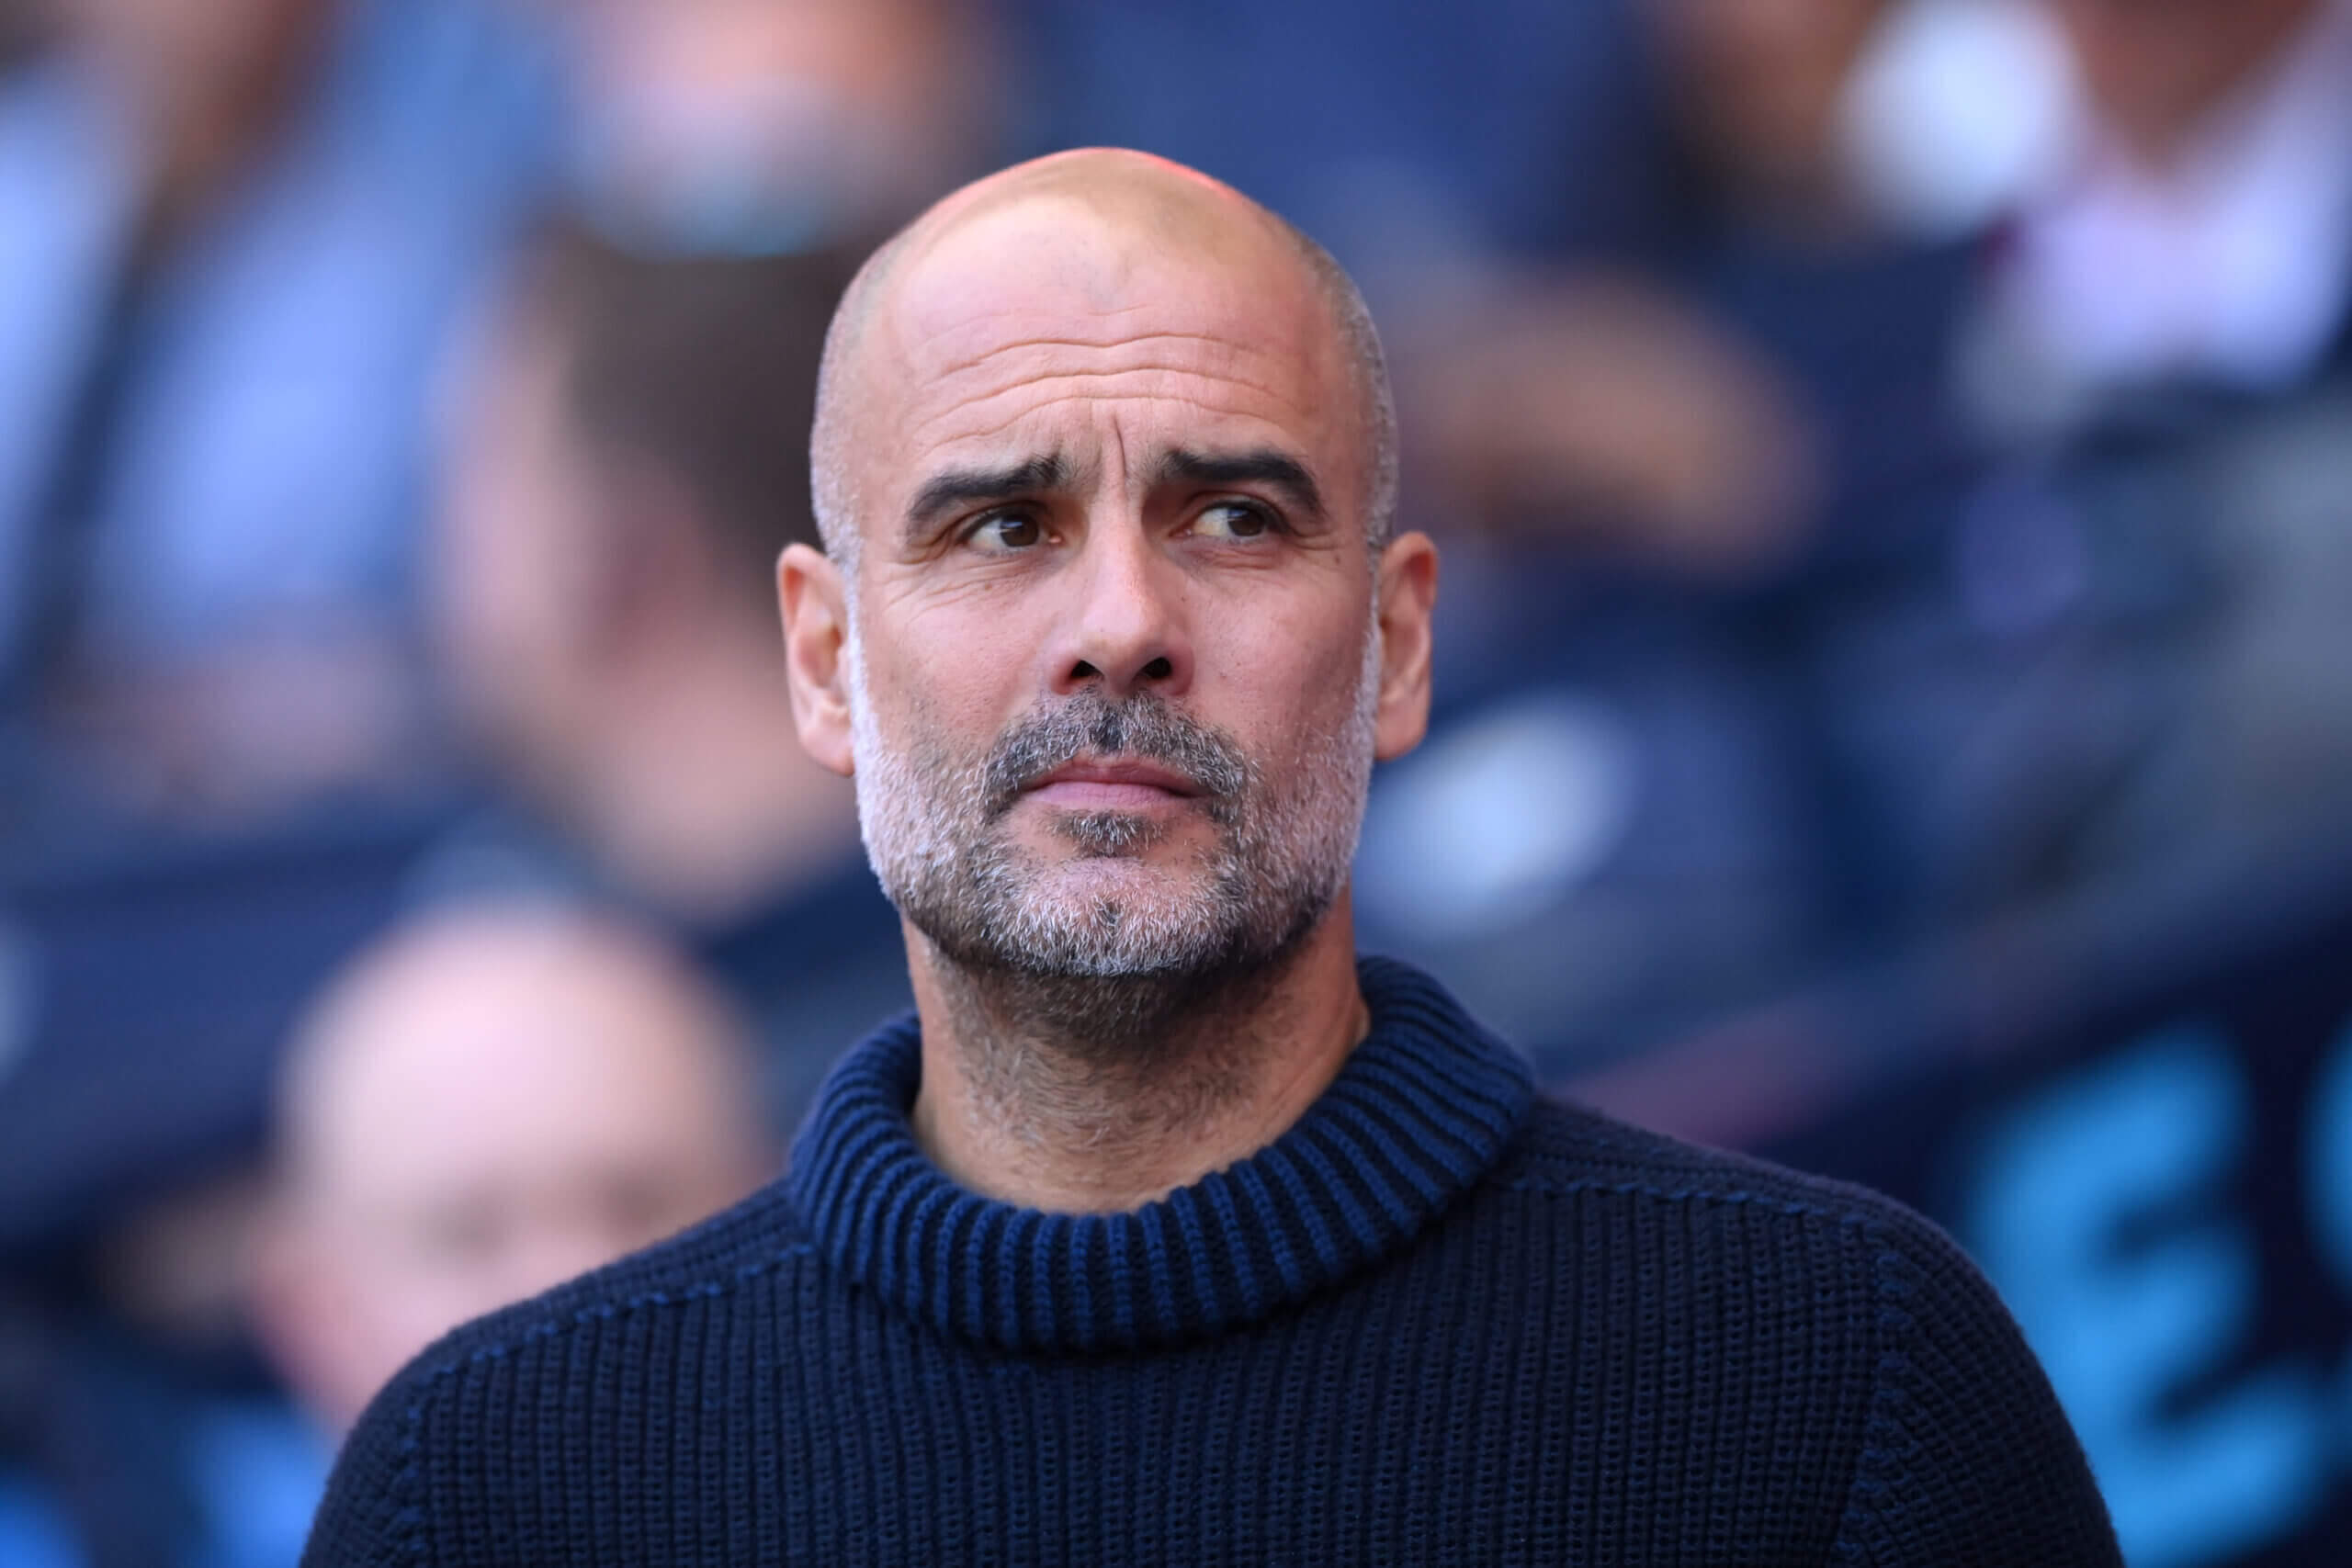 Guardiola will carry on at City (for now) but the search for motivation has begun